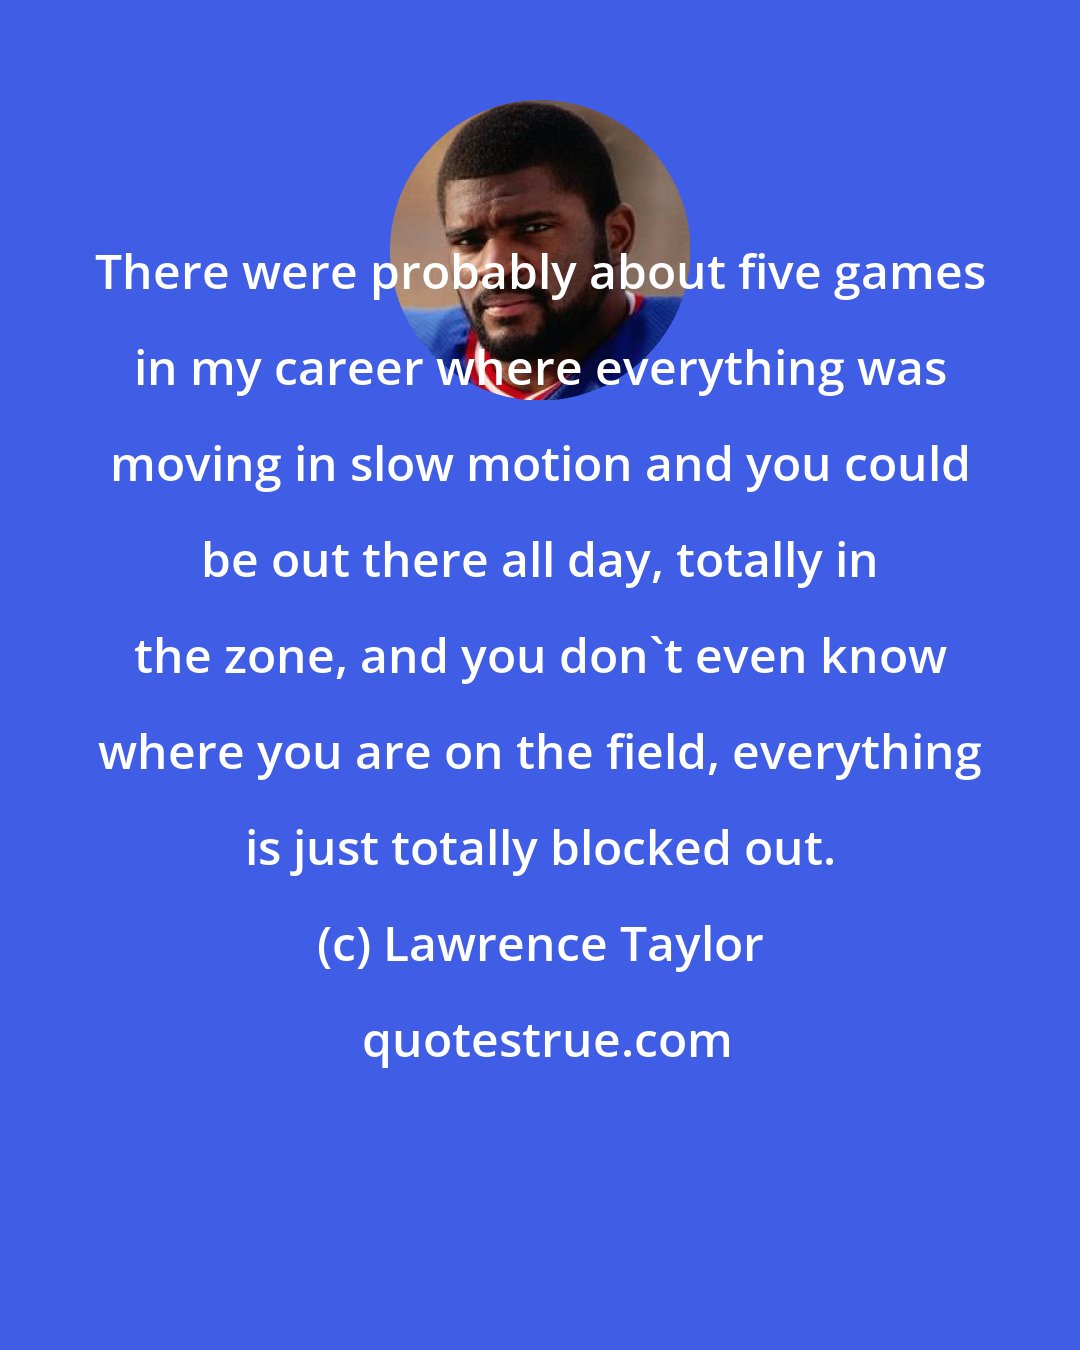 Lawrence Taylor: There were probably about five games in my career where everything was moving in slow motion and you could be out there all day, totally in the zone, and you don't even know where you are on the field, everything is just totally blocked out.